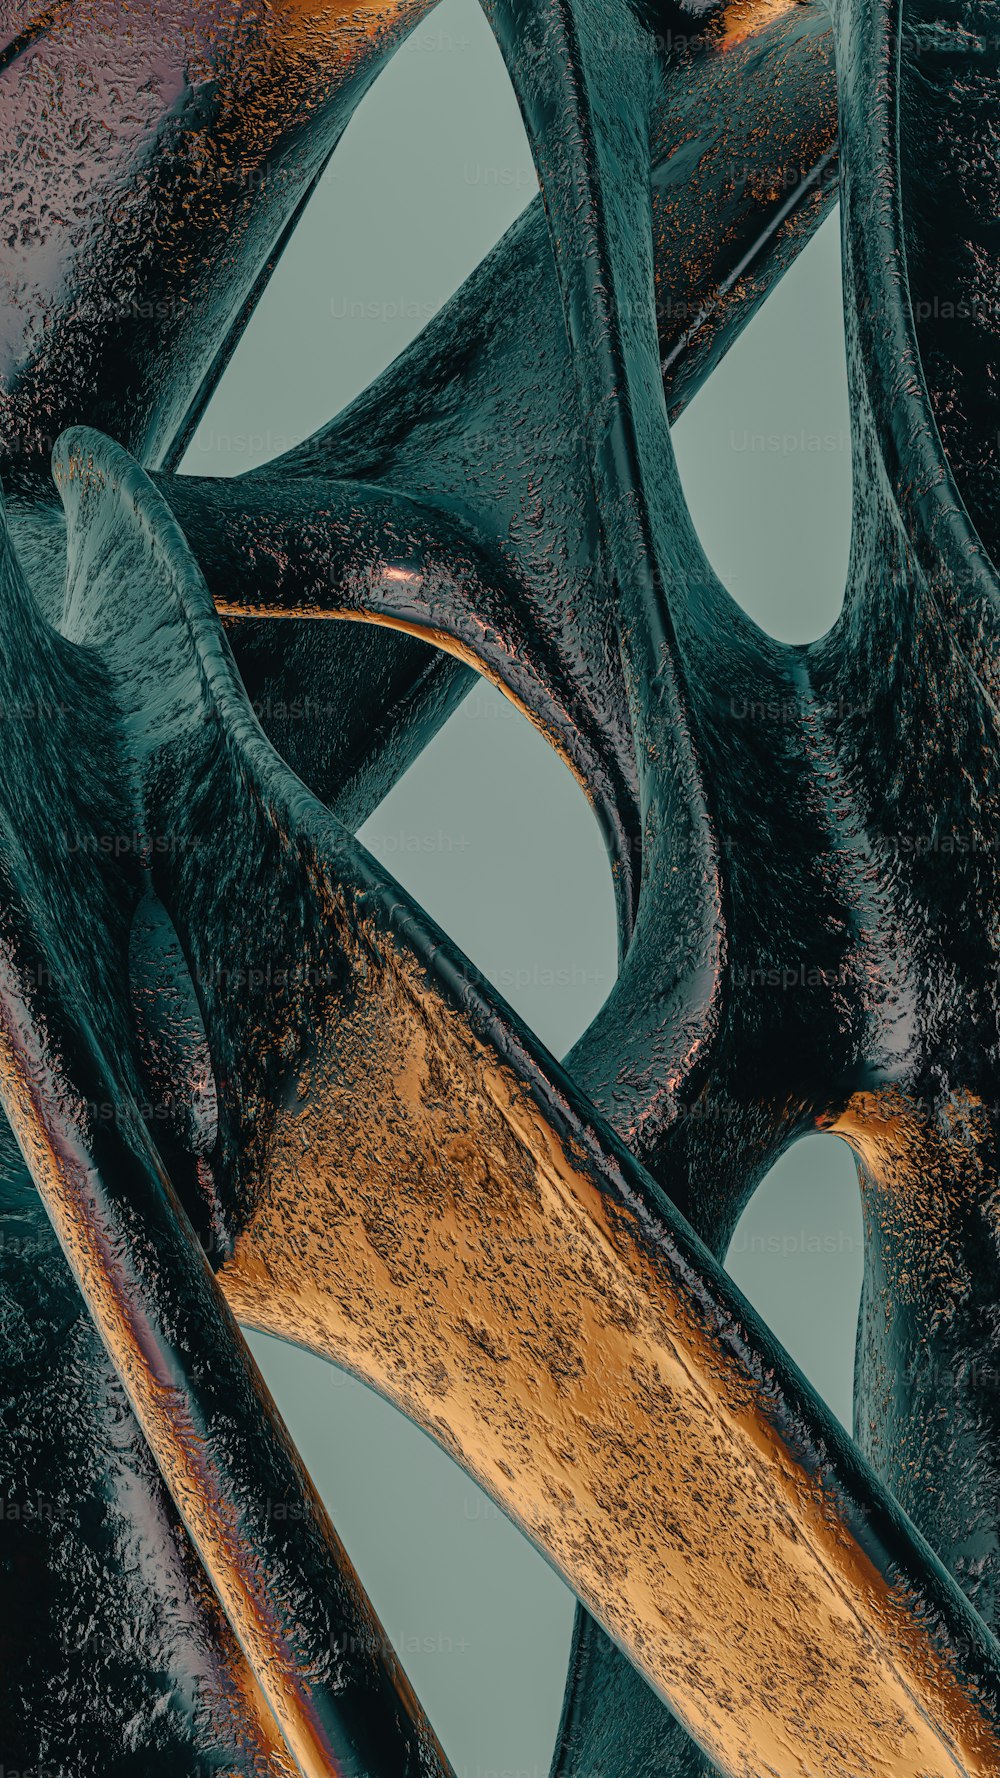 a close up of a metal sculpture with a wooden handle